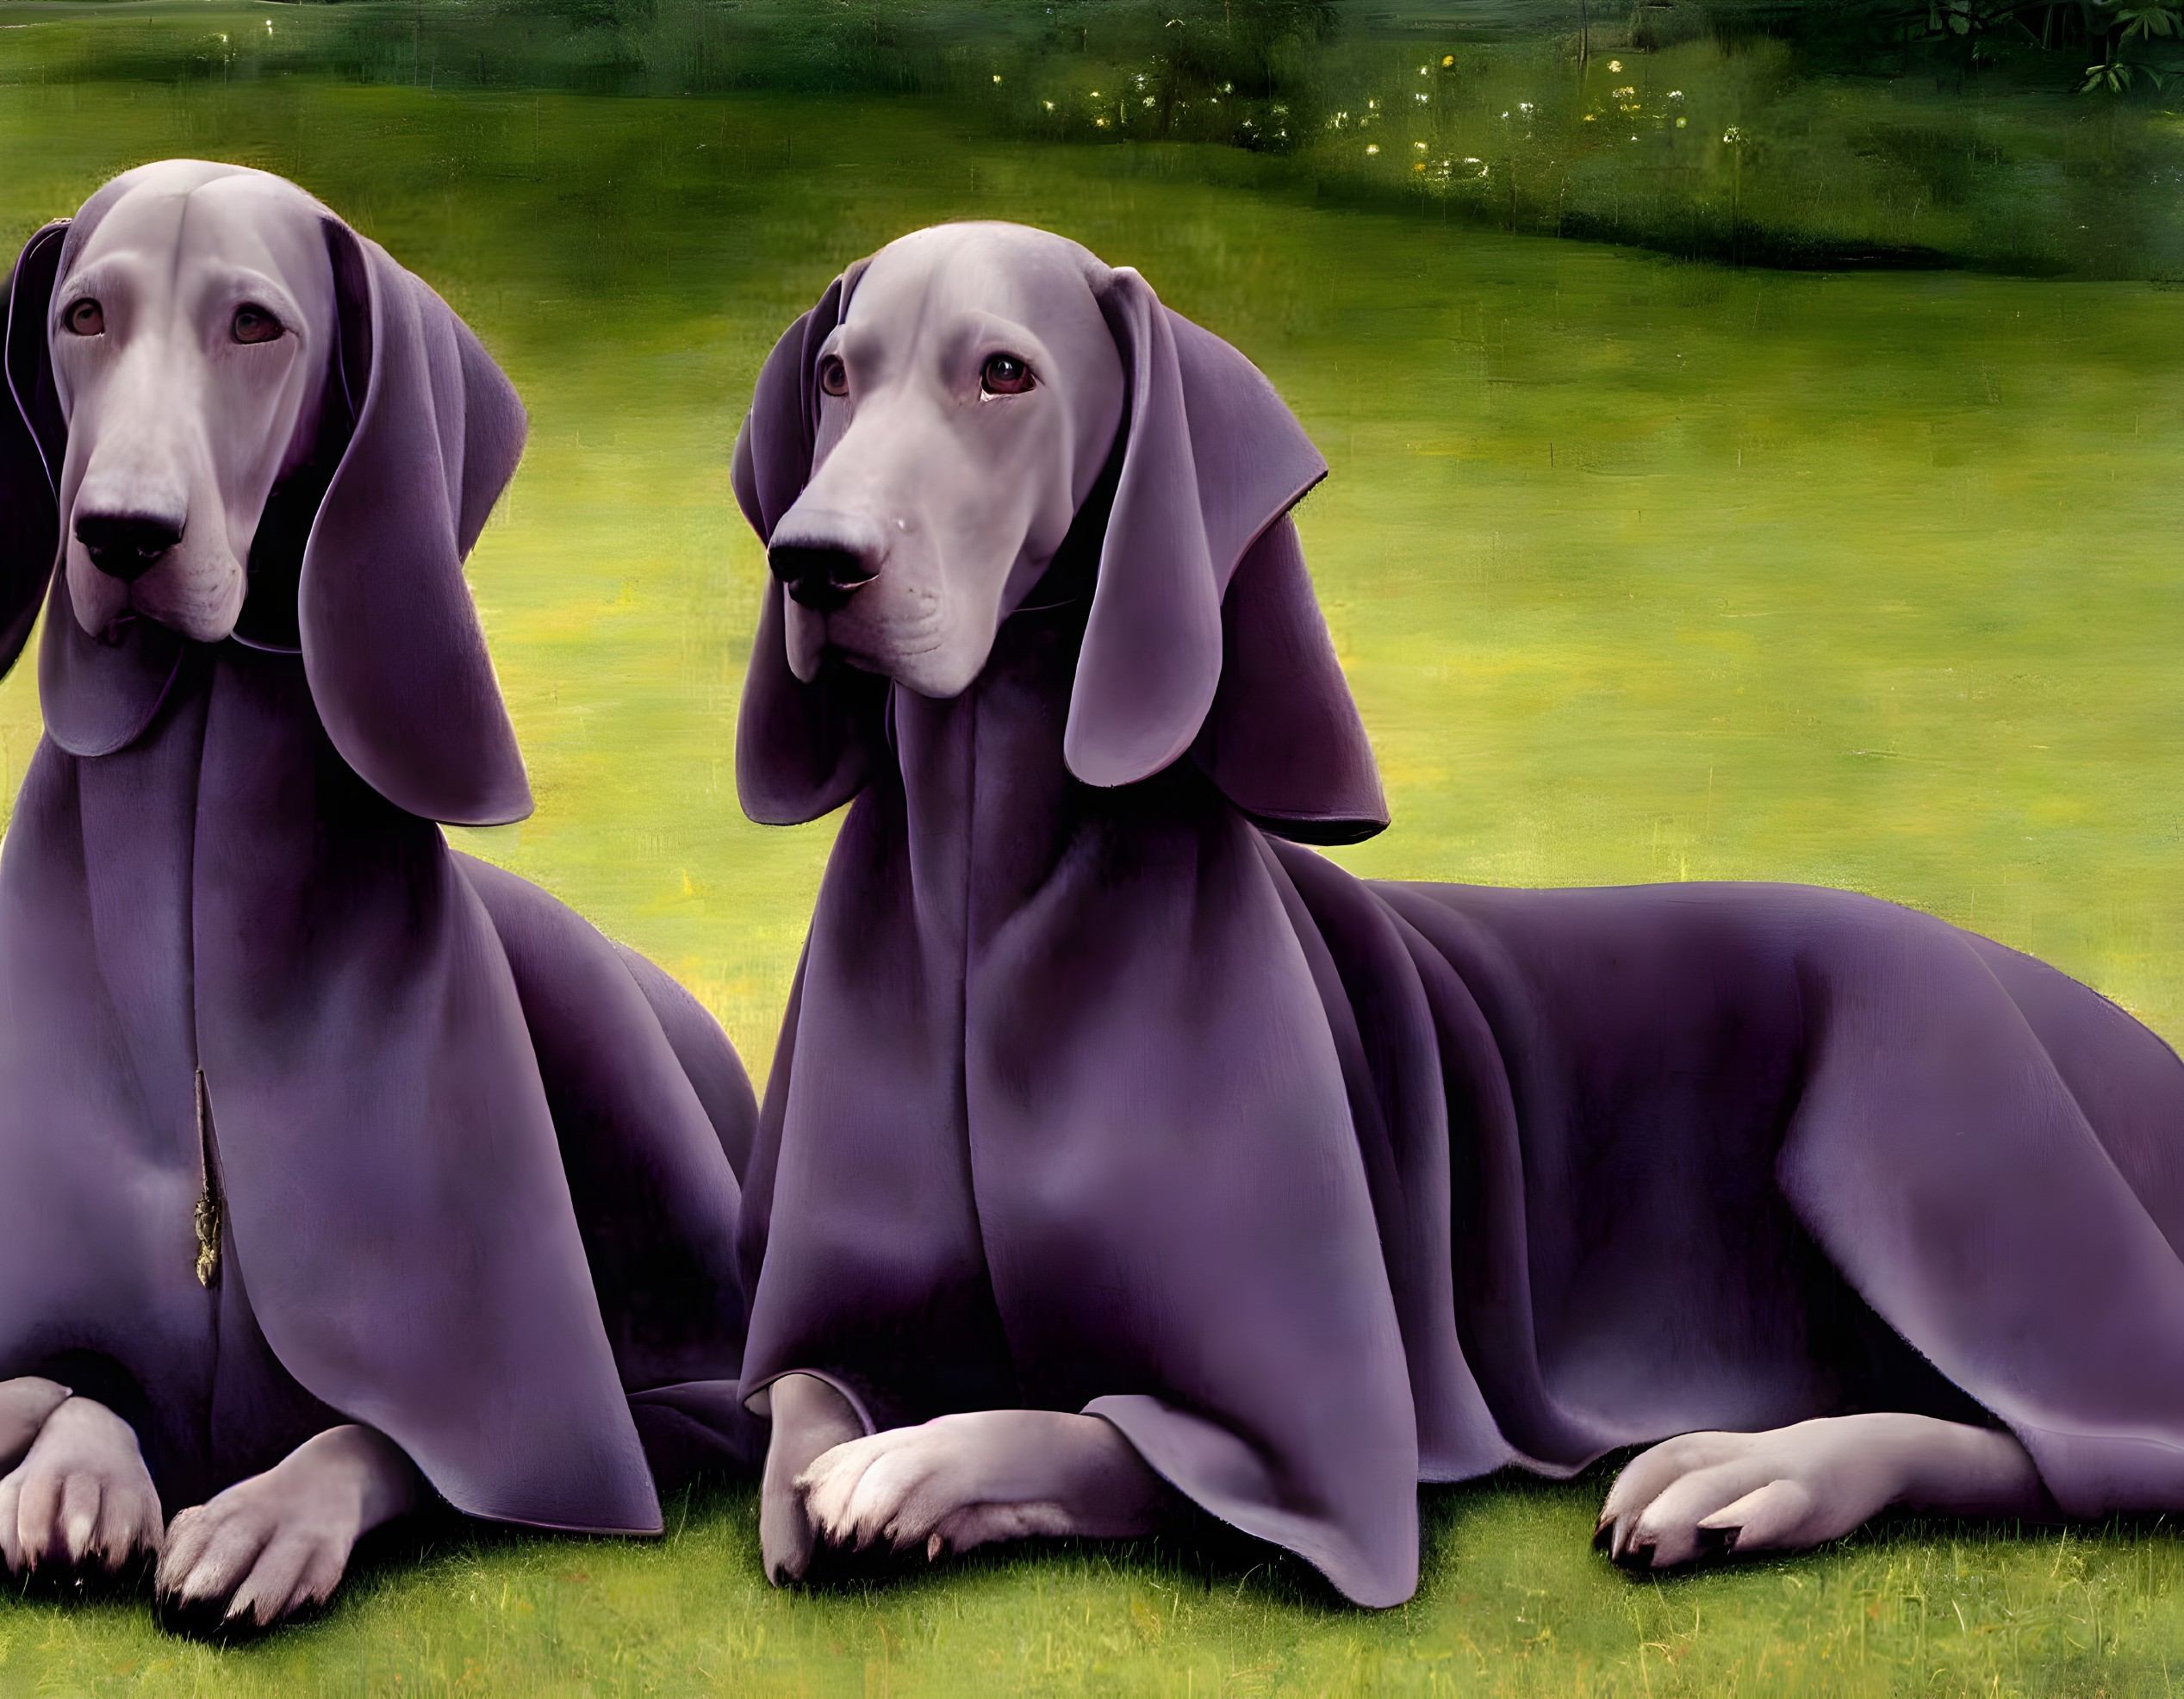 Two purple dogs with exaggerated droopy features sitting on grassy background